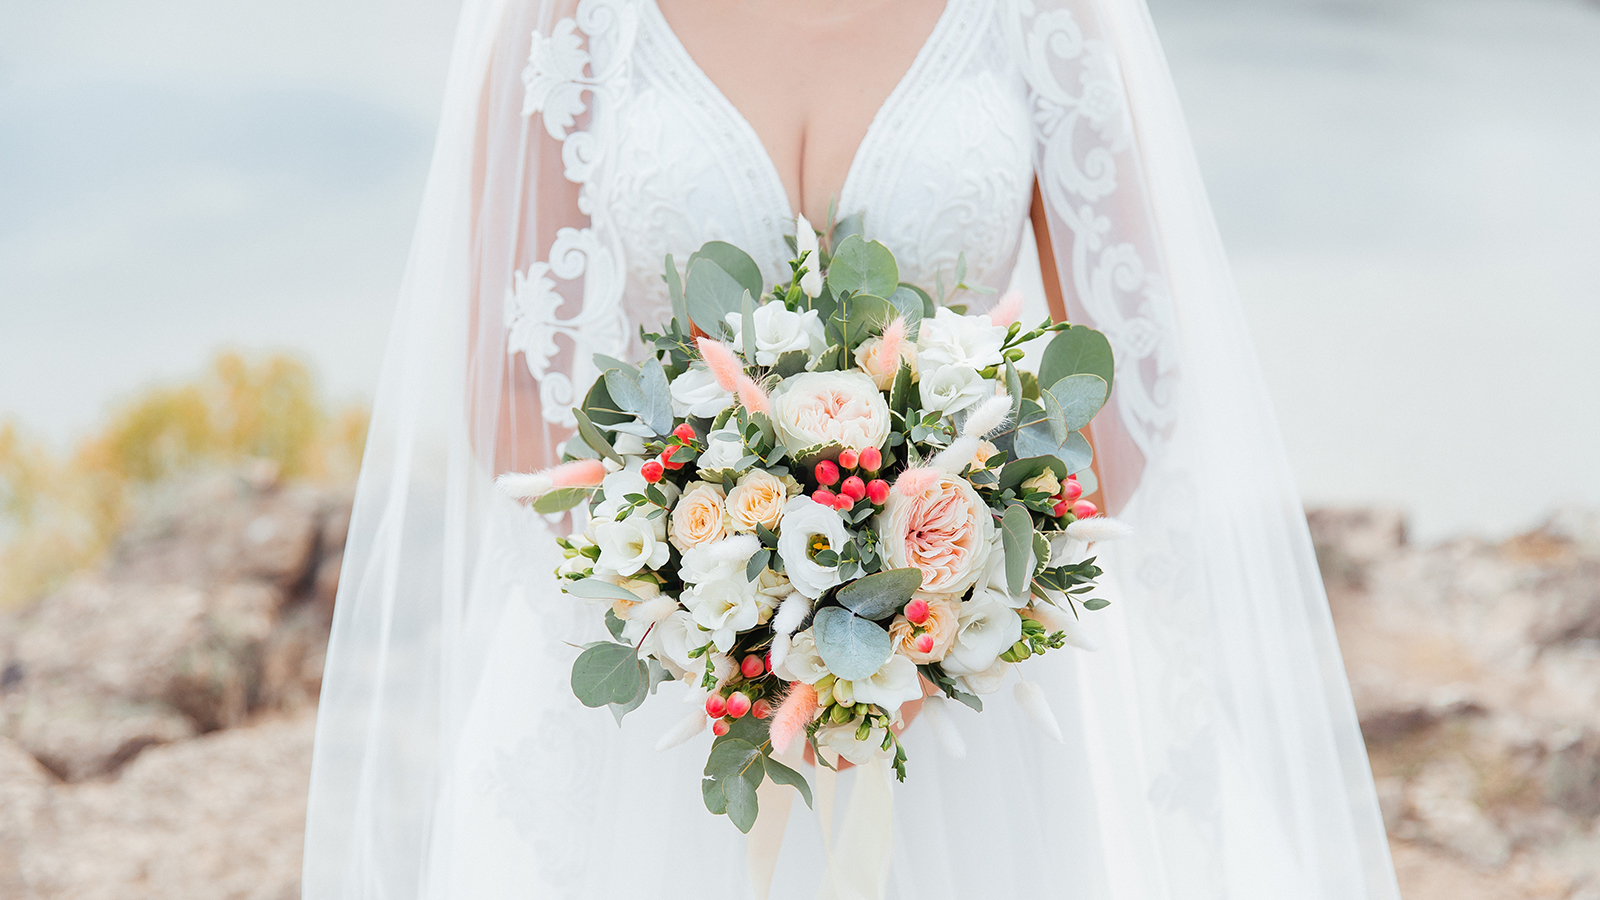 luxurious bouquet in the hands of the bride in a wedding dress